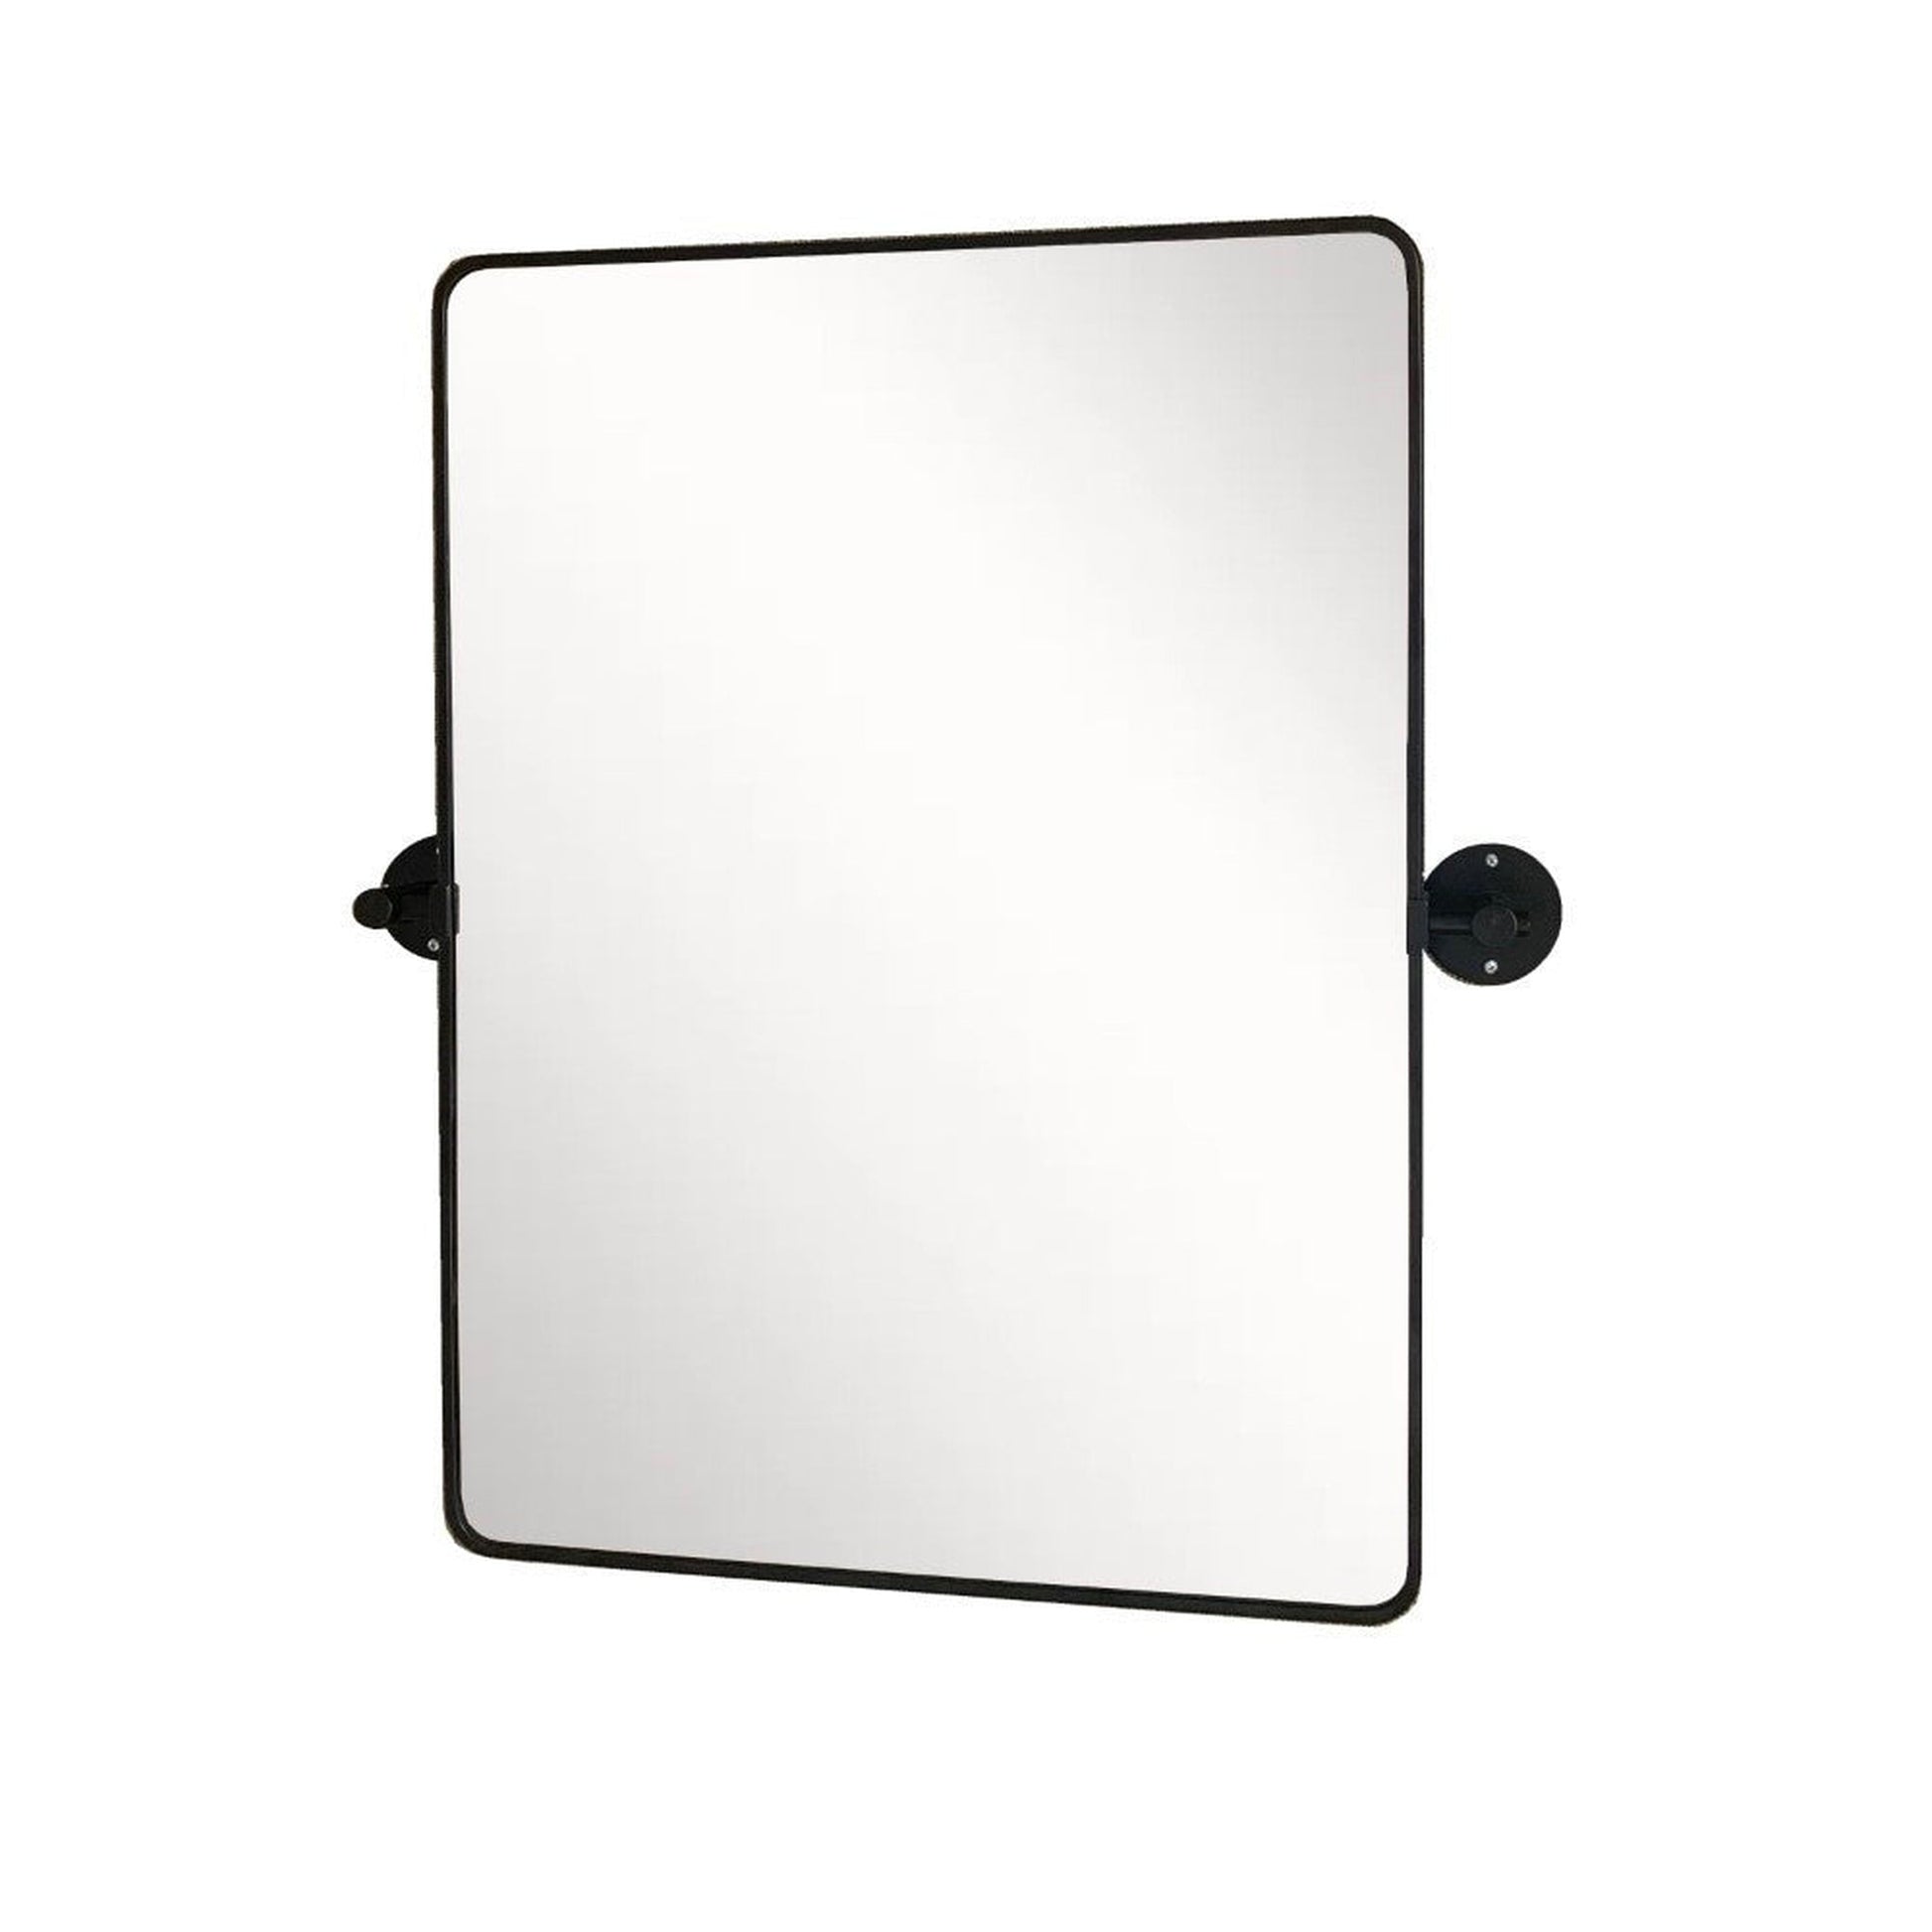 Bellaterra Home 28" x 30" Black Rectangle Wall-Mounted Steel Framed Mirror With Bracket Support